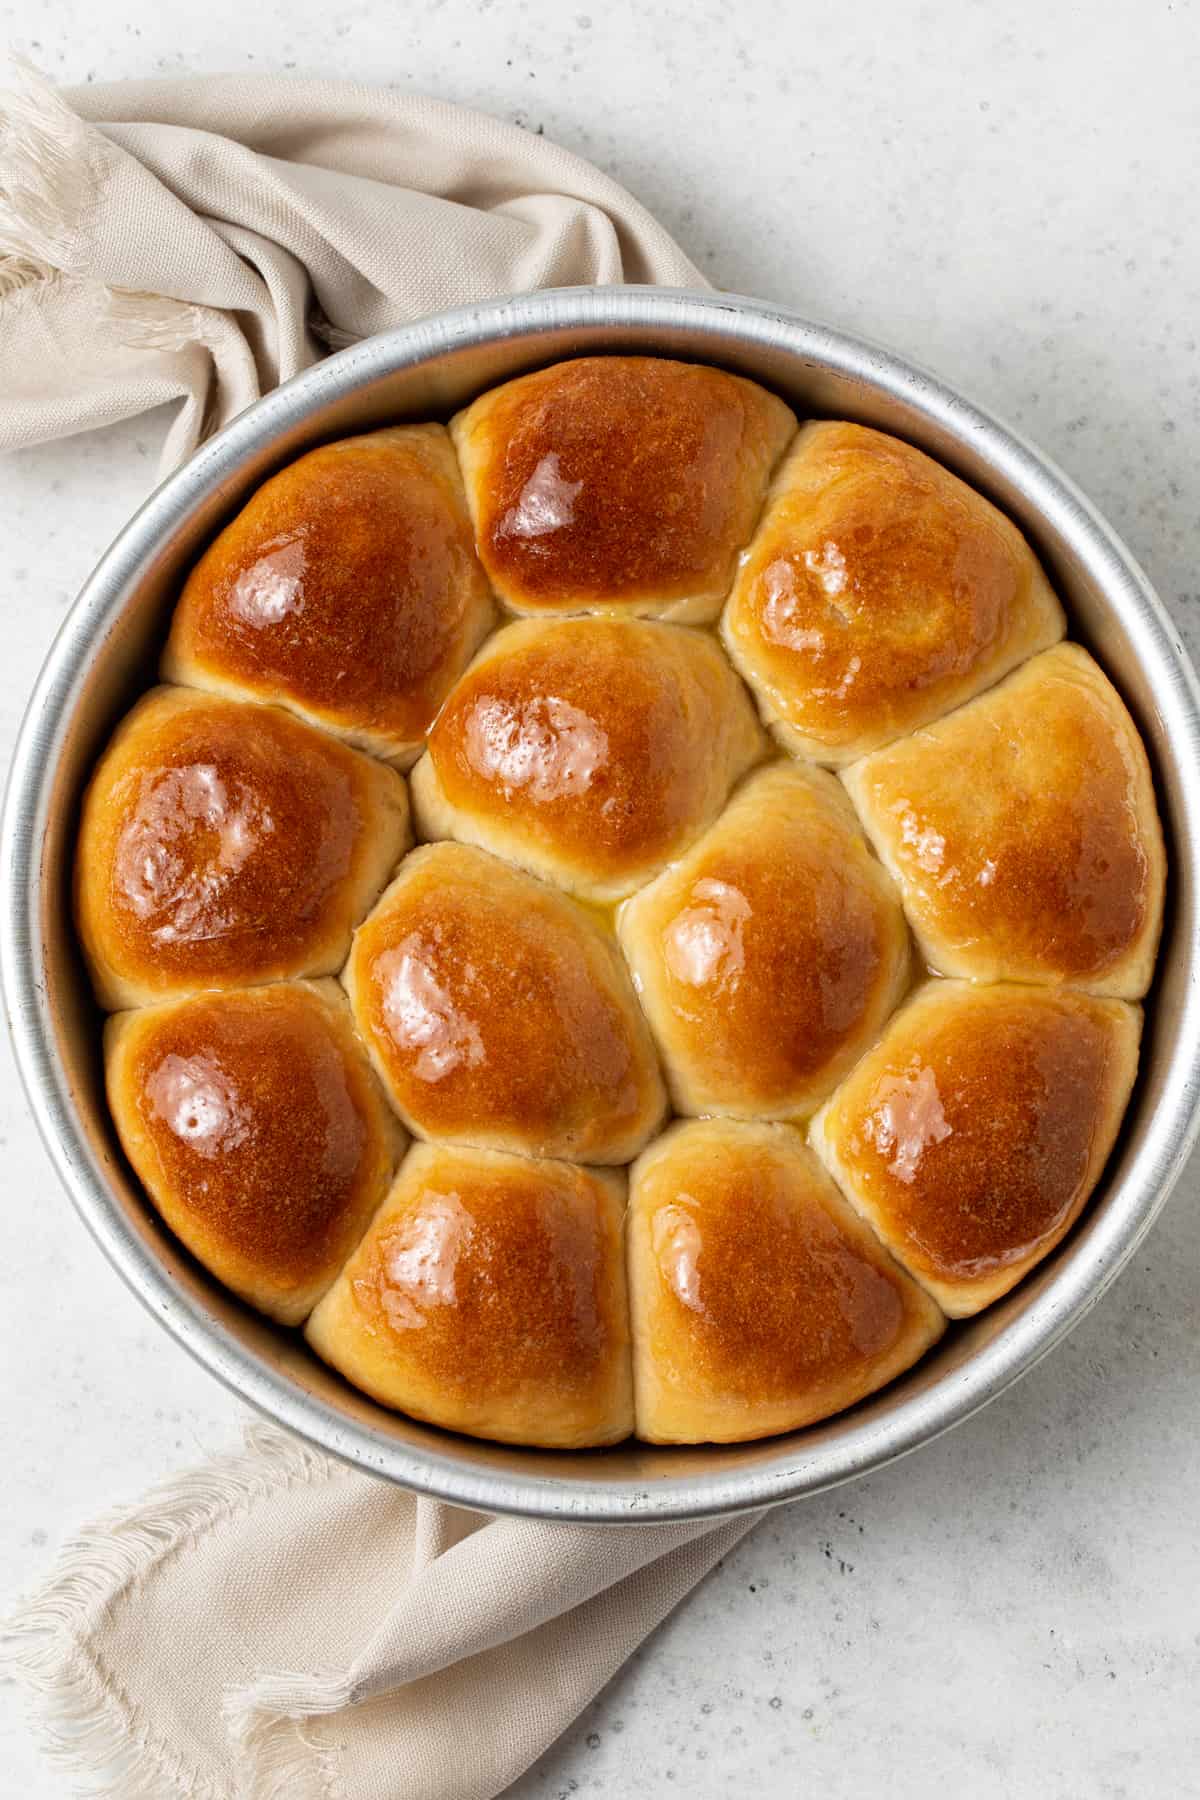 Baked potato rolls in a round cake pan.